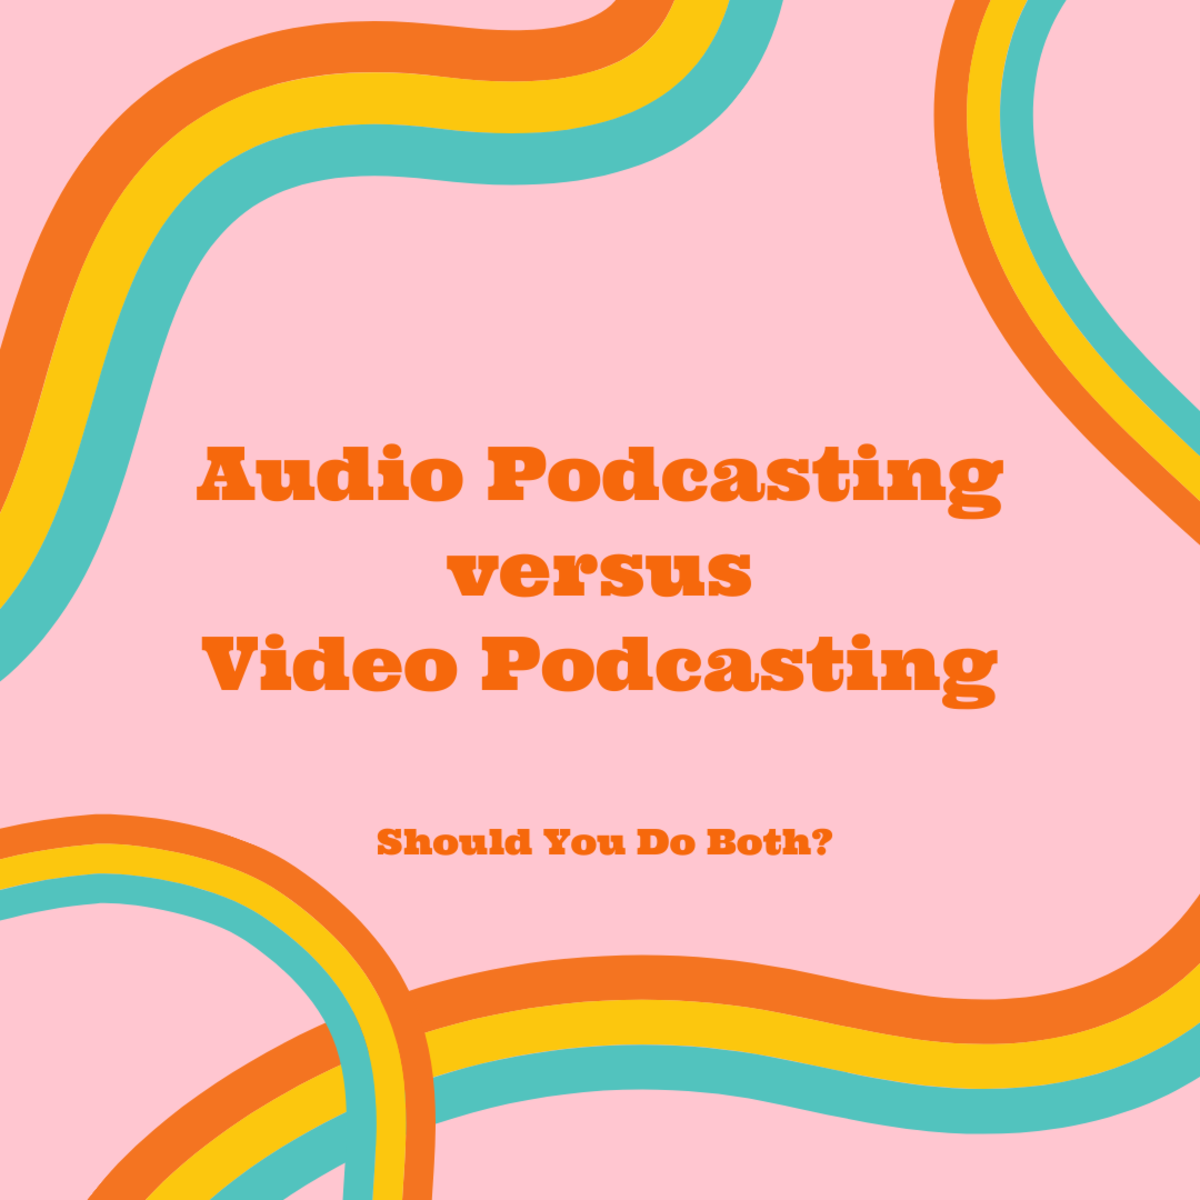 Audio Podcasting Versus Video Podcasting: Should You Do Both?